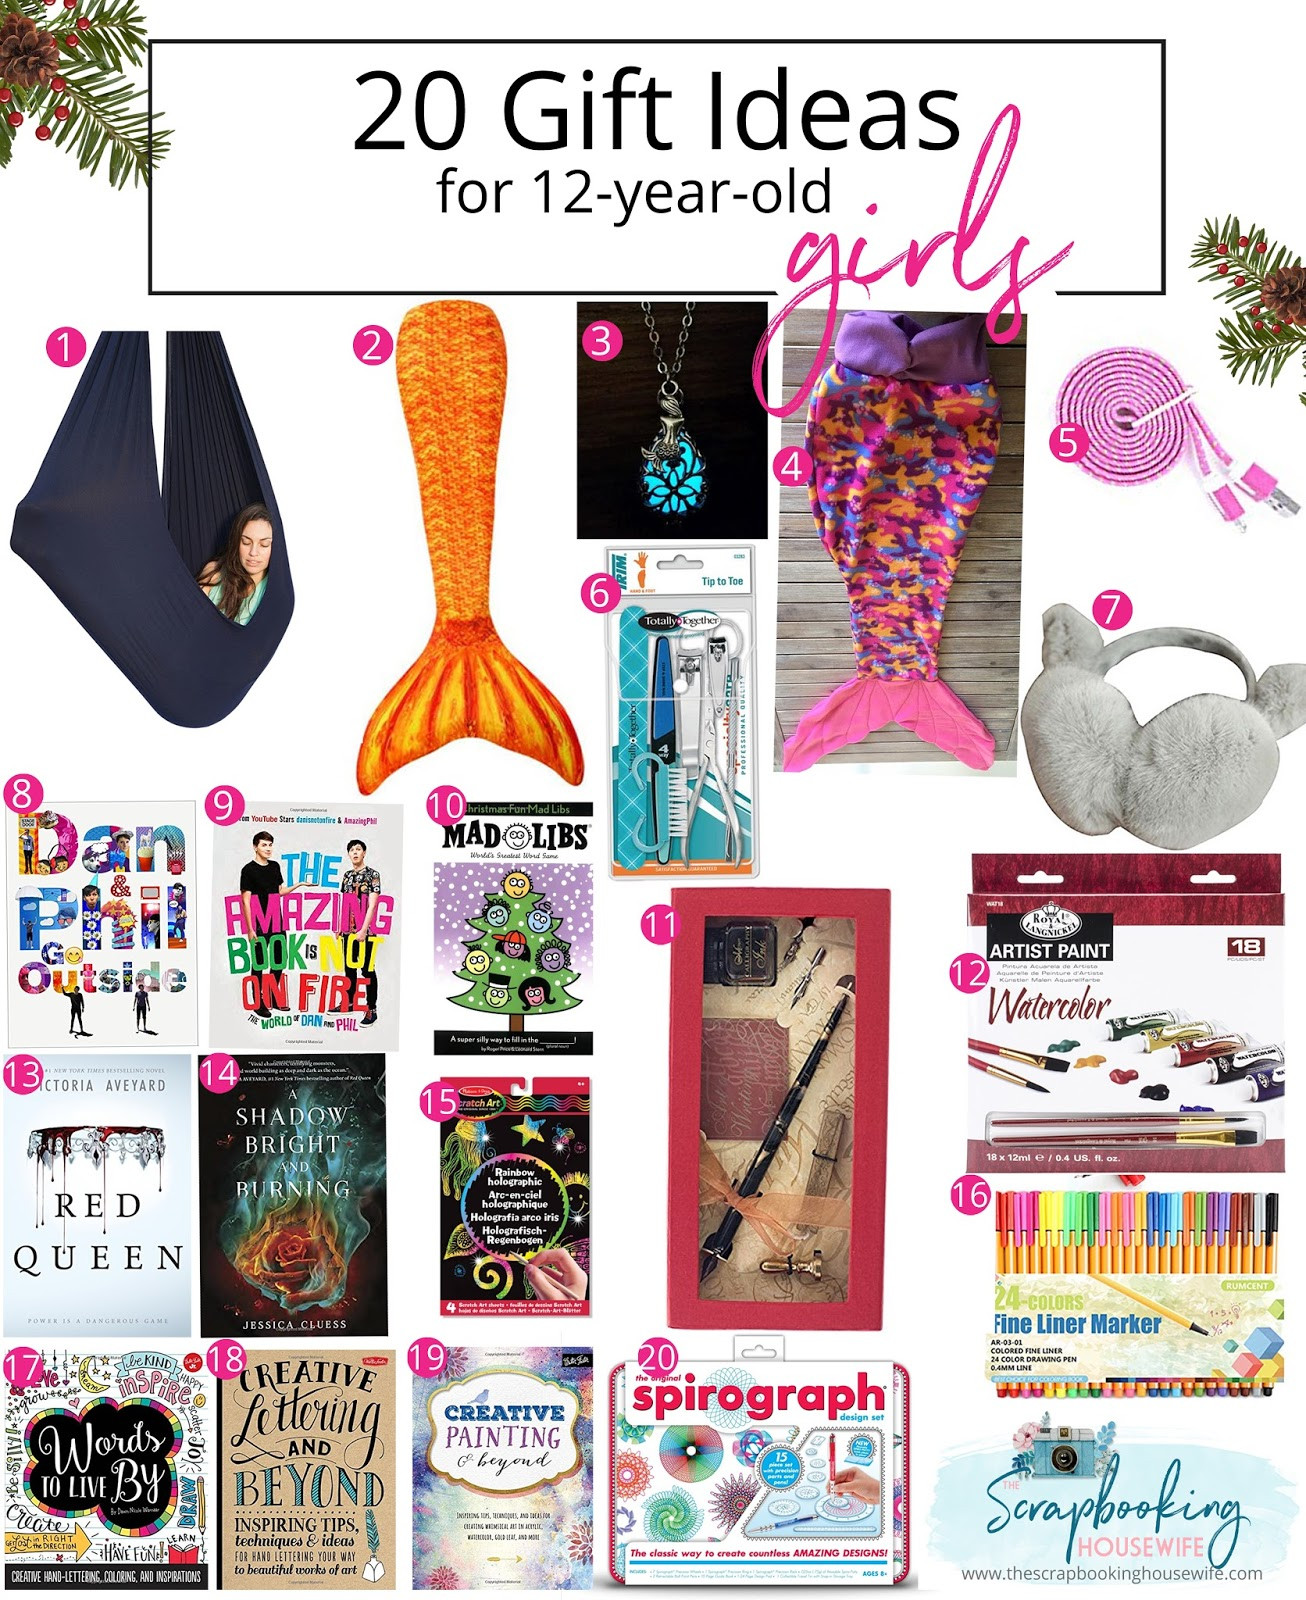 Gift Ideas For 12 Yr Old Girls
 Ellabella Designs 13 GIFT IDEAS FOR TODDLERS